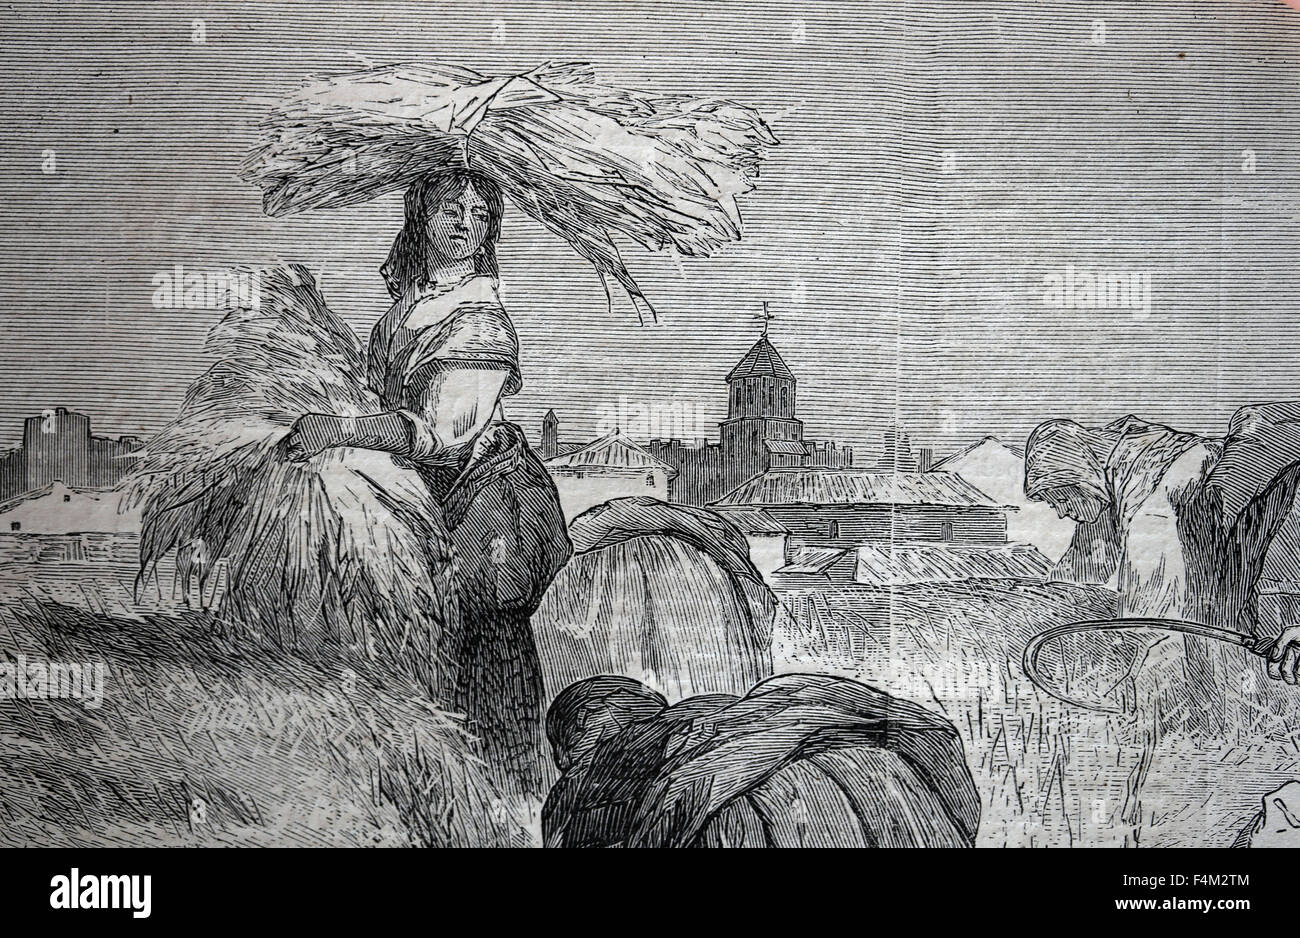 Europe. Spain. Spanish customs. Harvest. Drawing by Valeriano Becquer and engraving by Rico. Almanac. The Illustration, Spain. Stock Photo